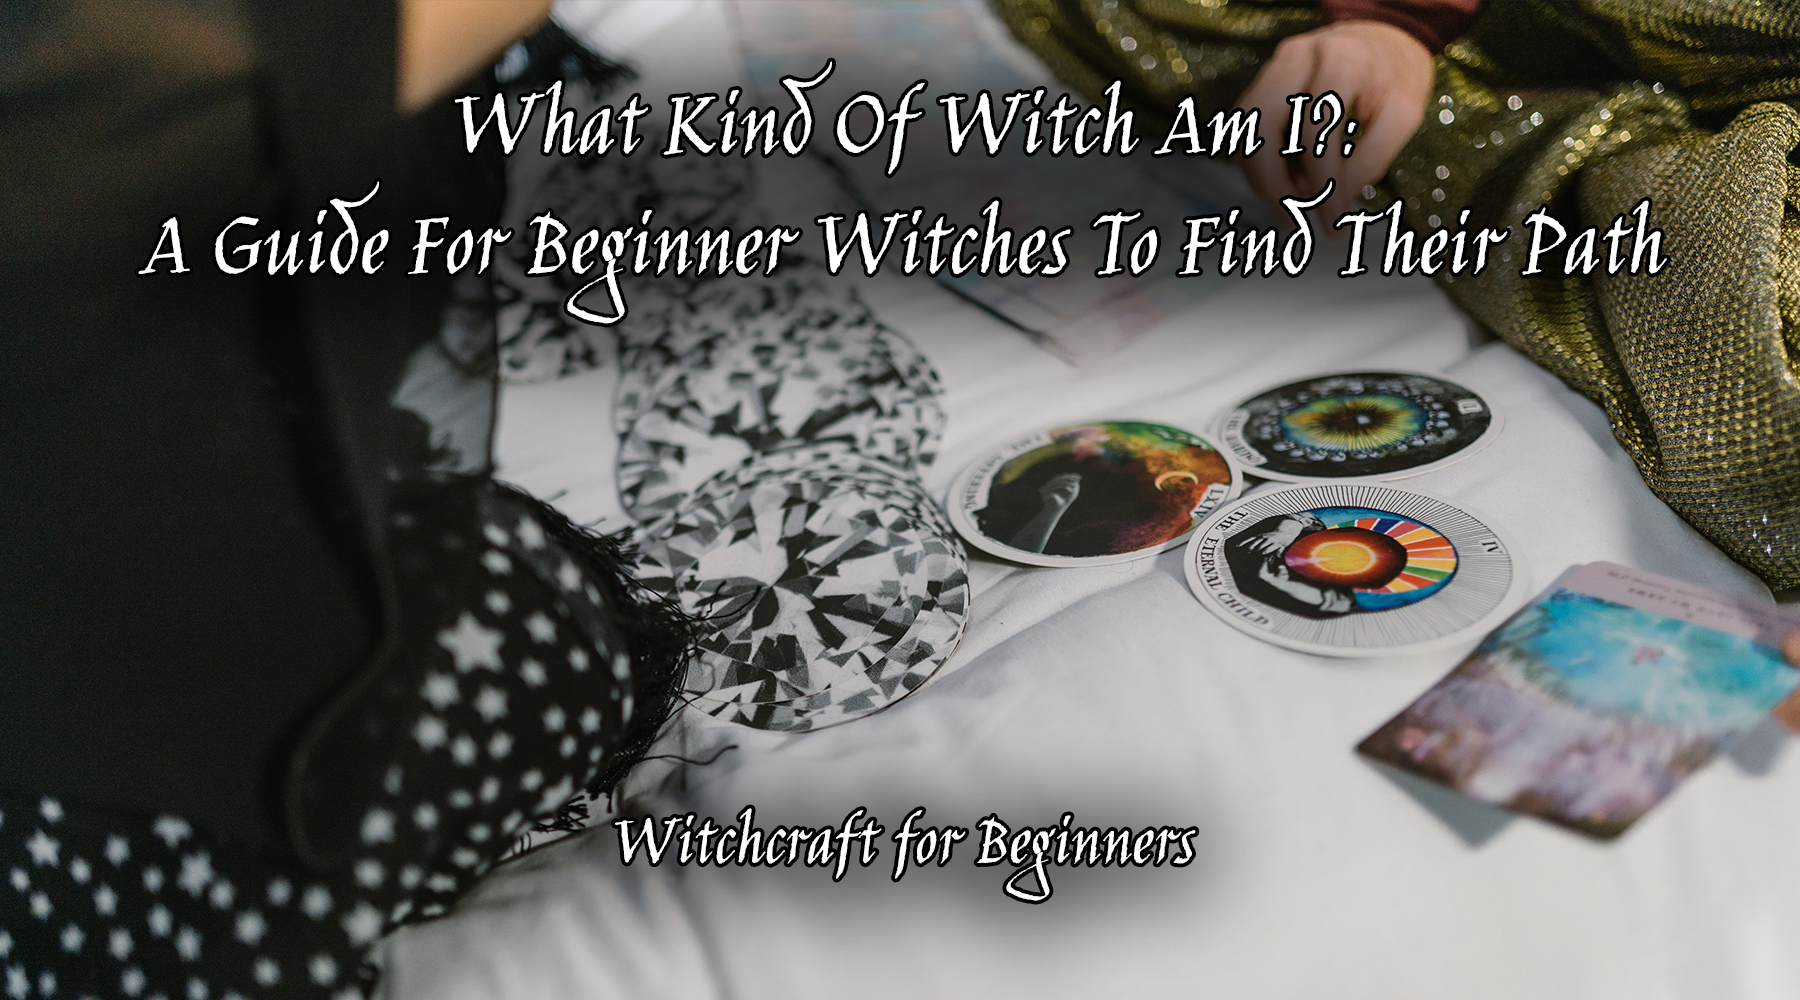 What Kind Of Witch Am I?: A Guide For Beginner Witches To Find Their Path